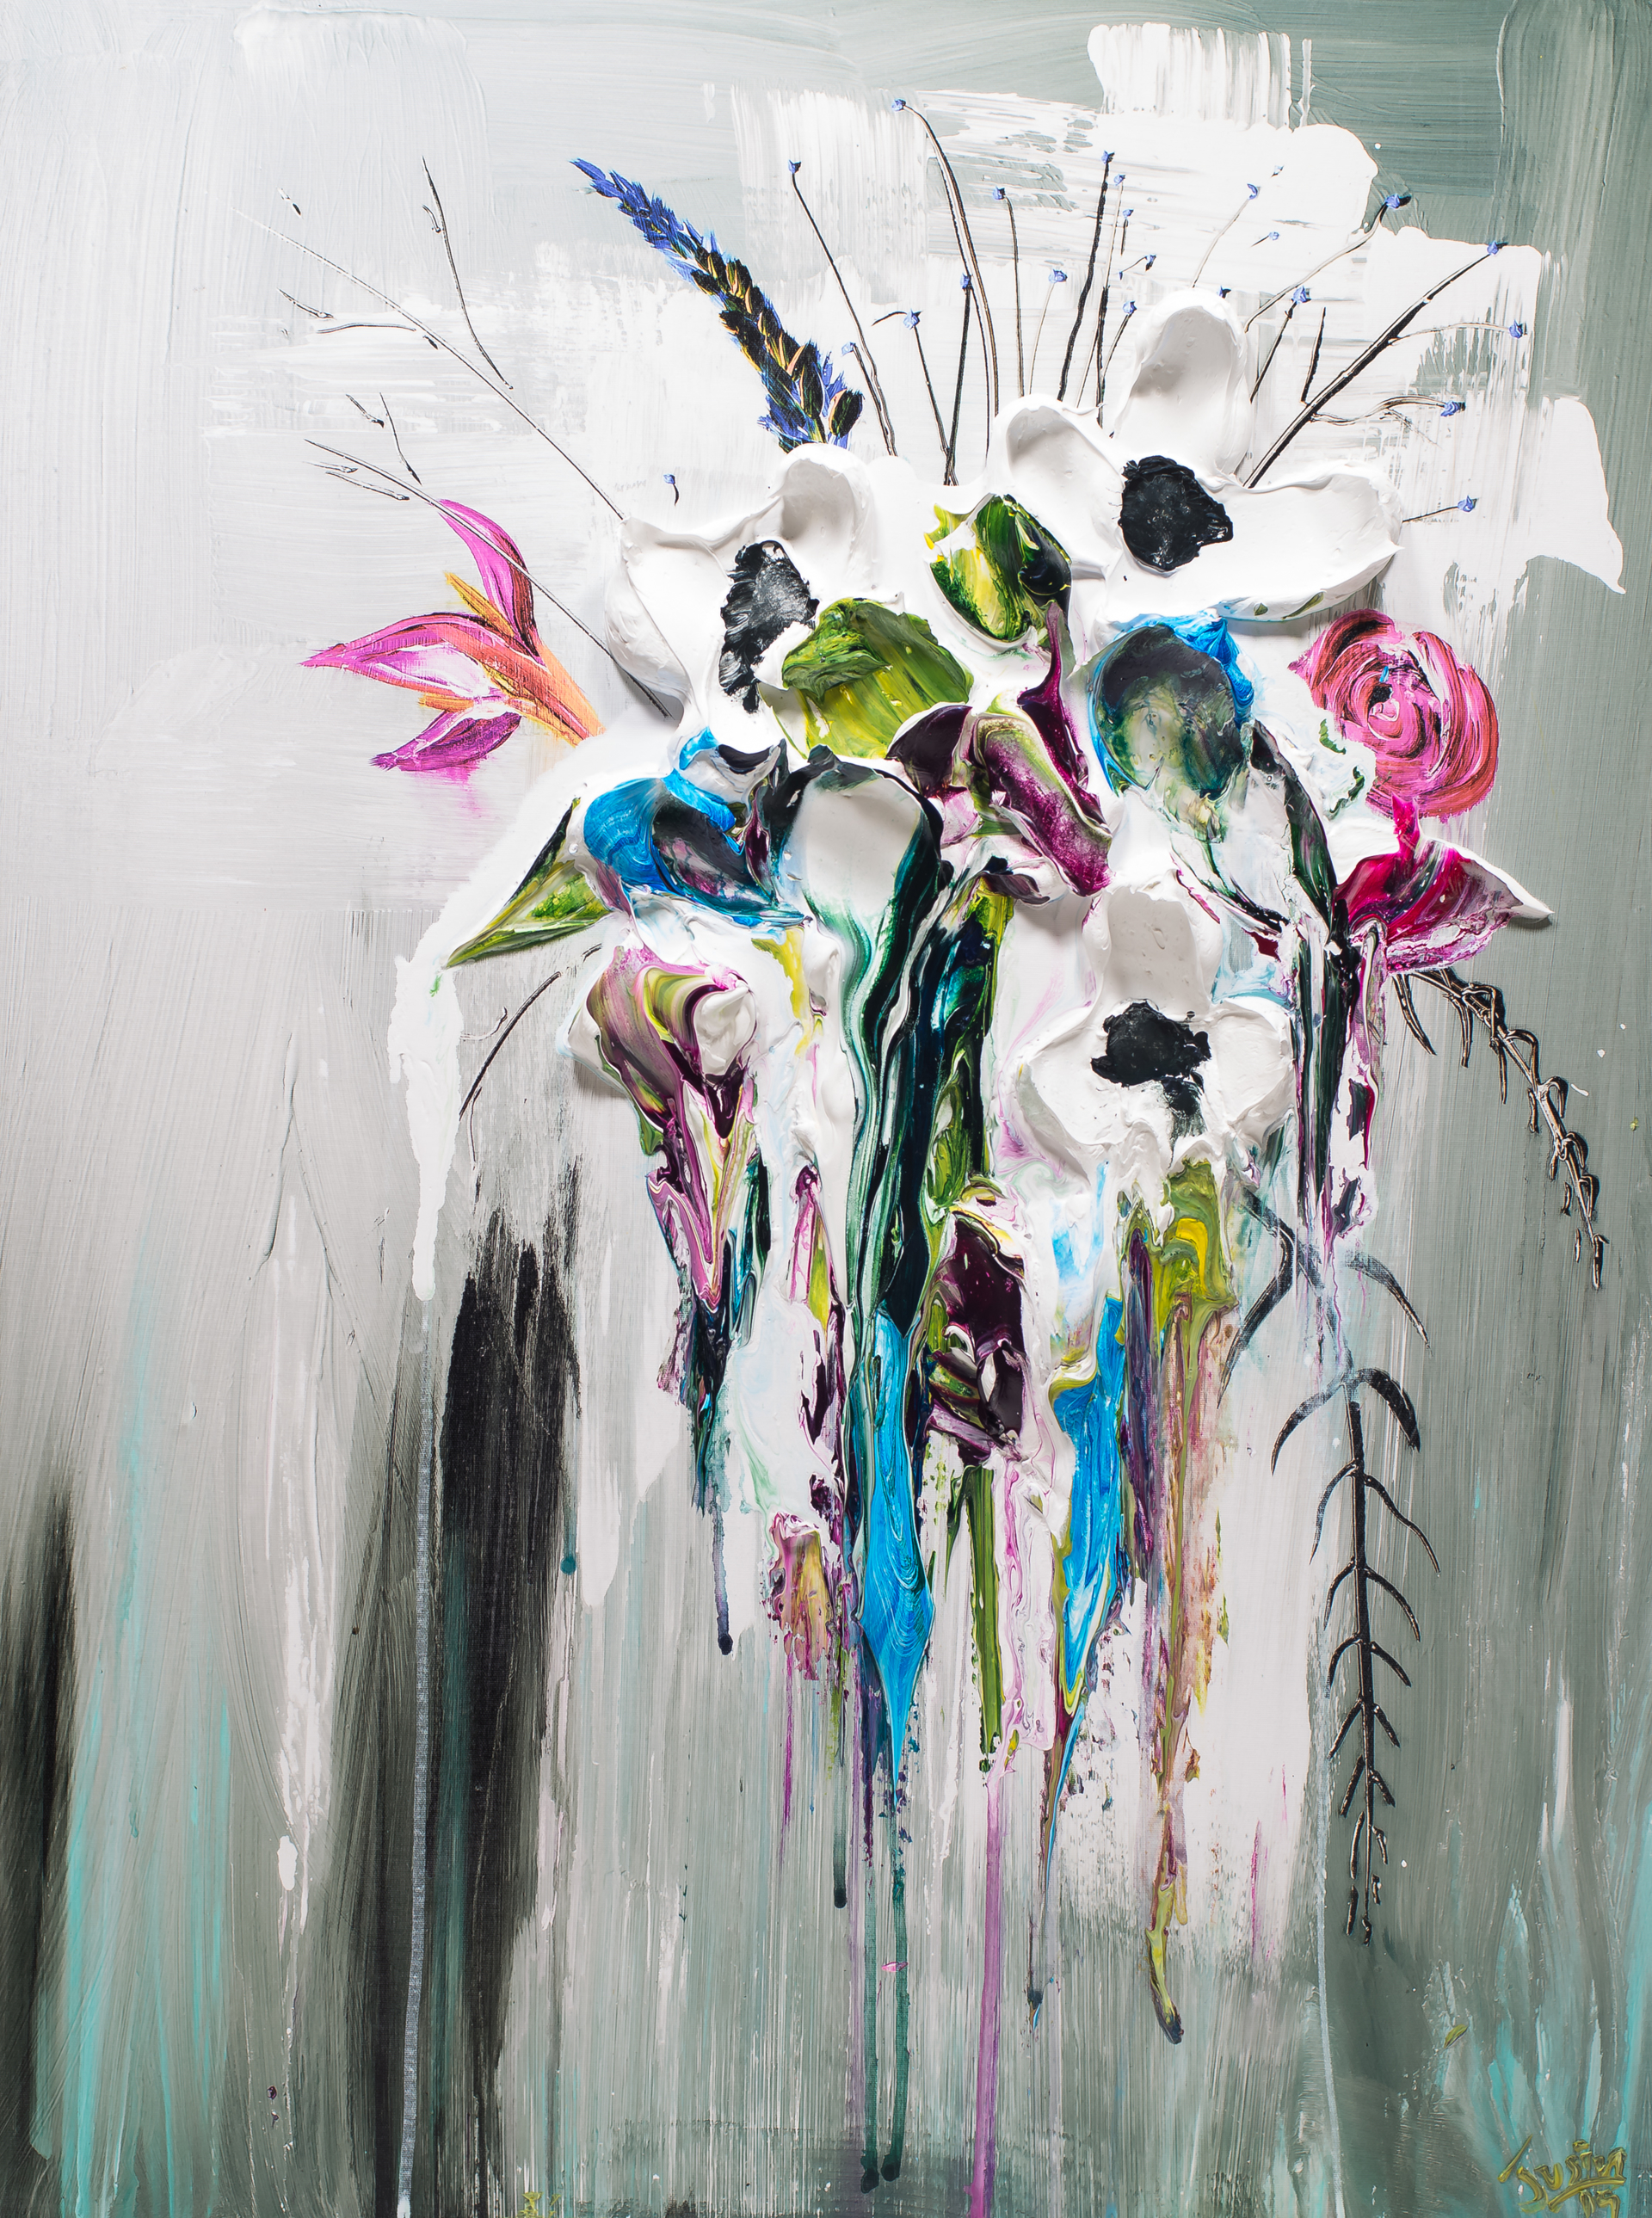 ABSTRACT FLORAL BOUQUET HPAE 9/50 by JUSTIN GAFFREY